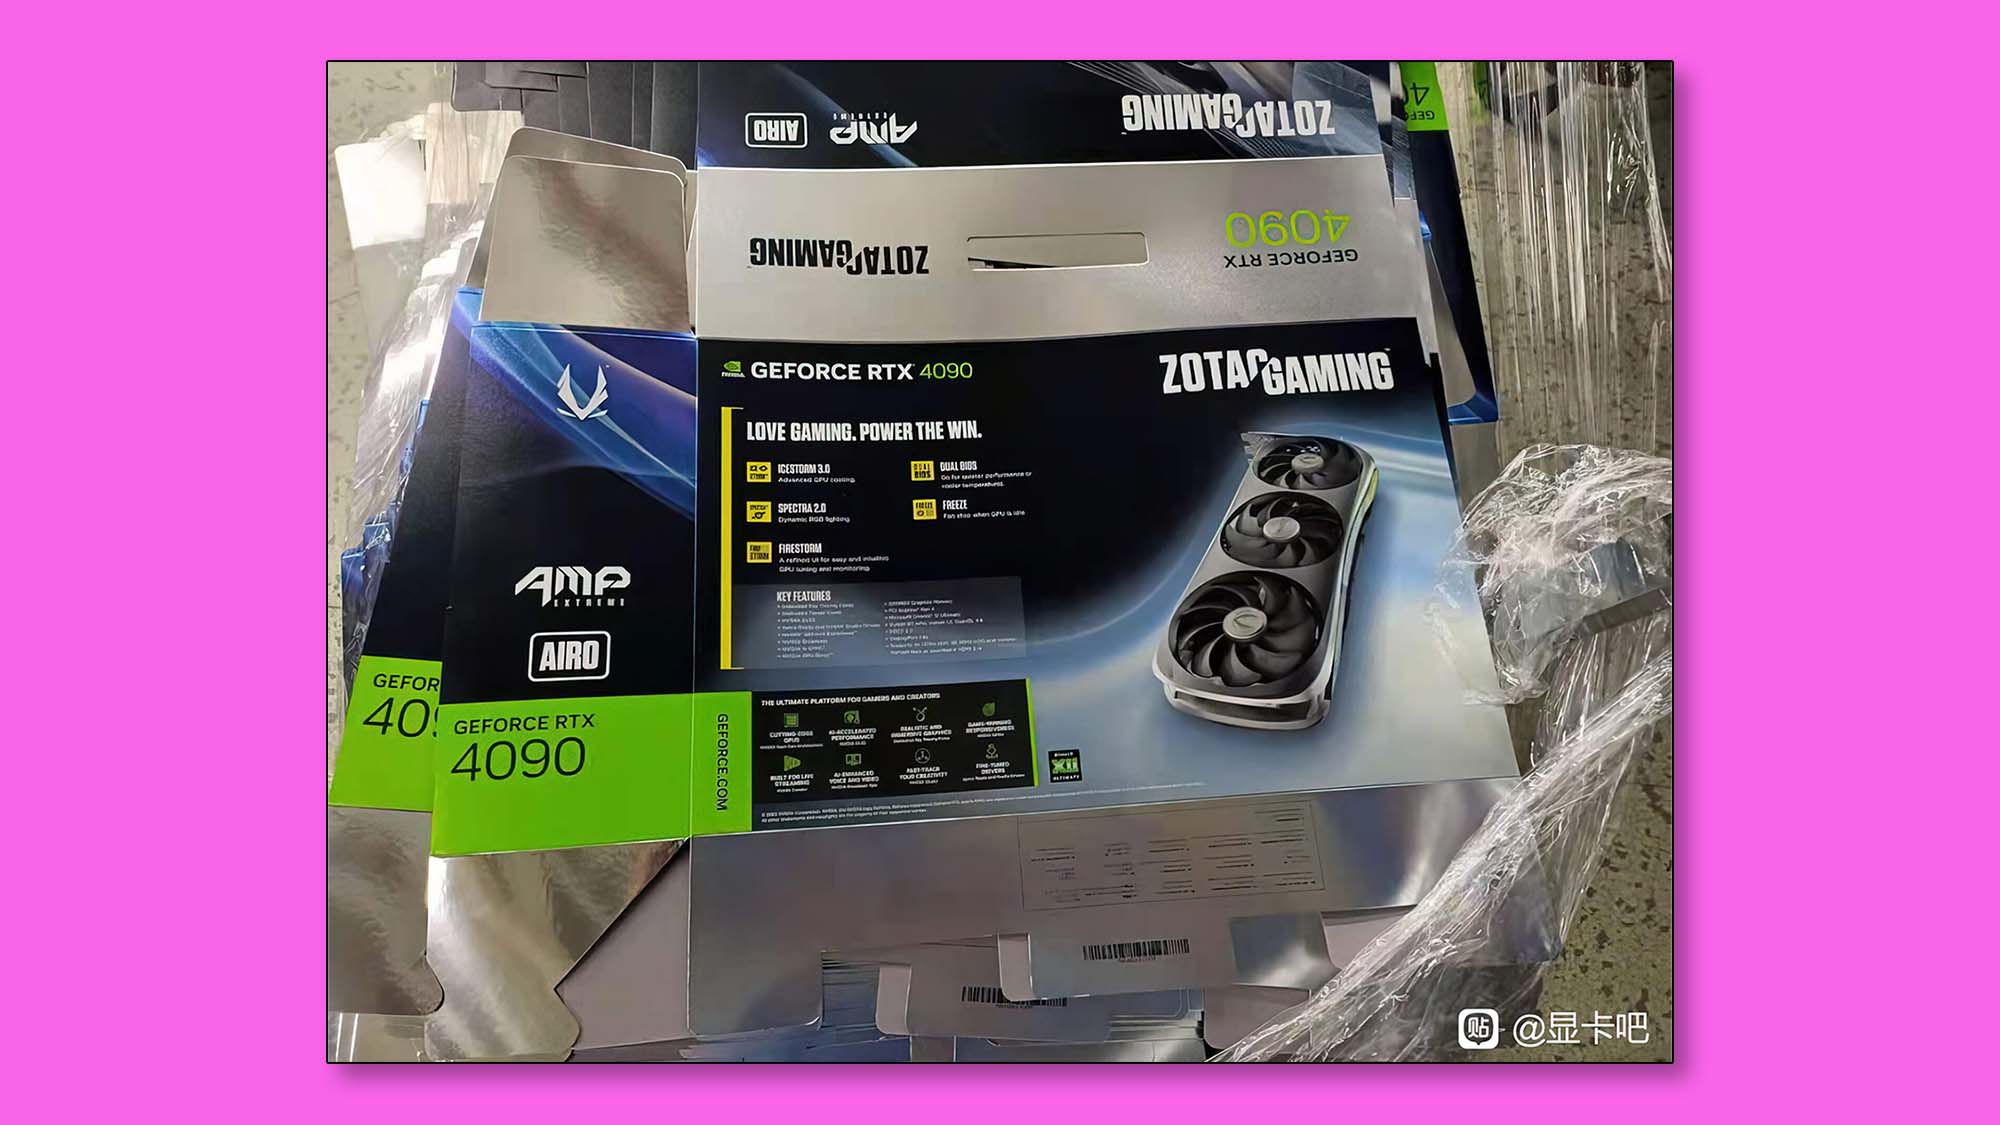 The purported packaging for the Zotac RTX 4090 AMP Extreme